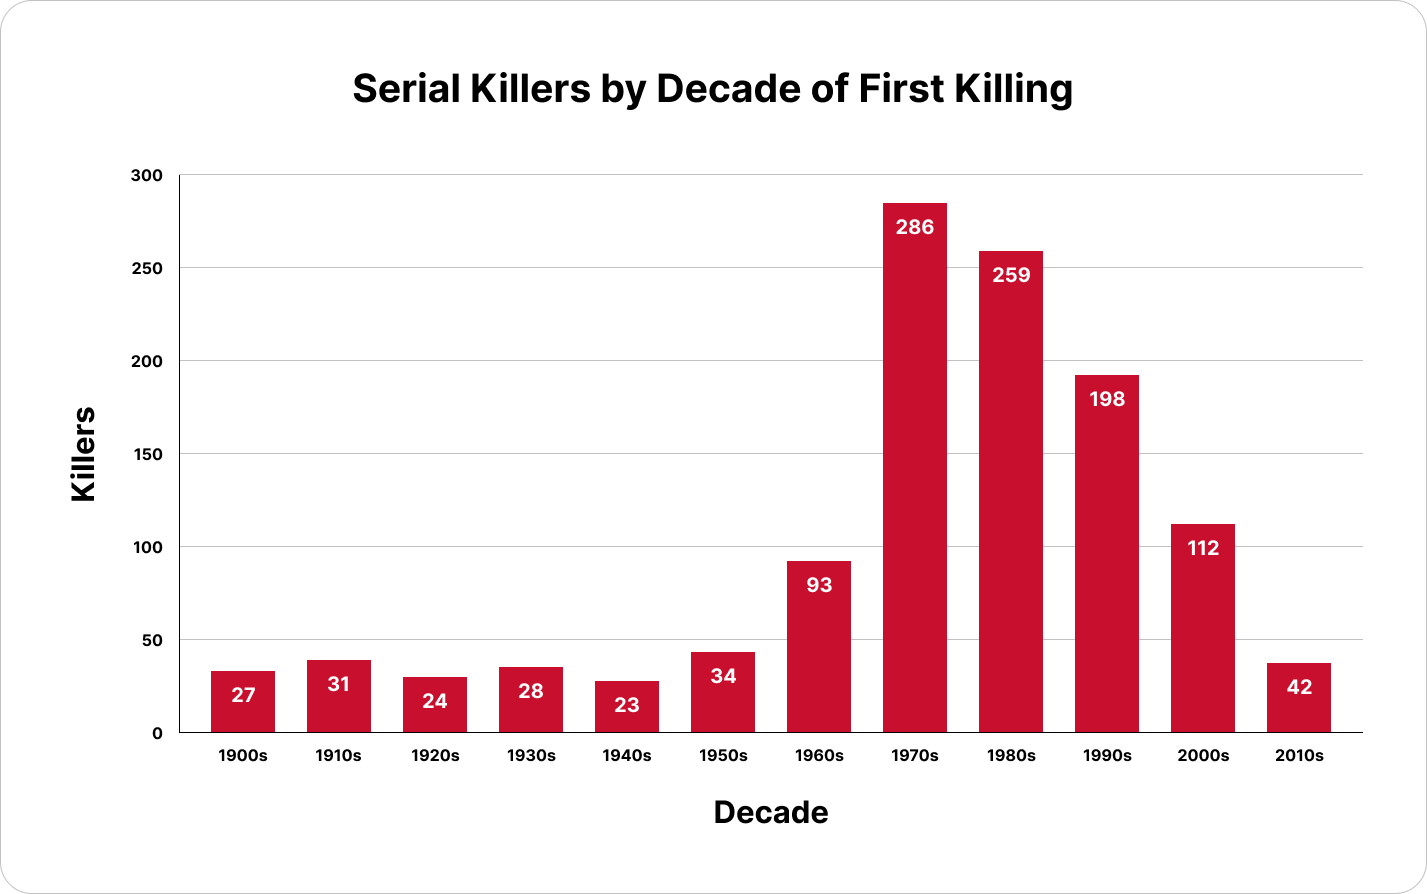 A chart: Serial Killers by Decade of First Killing. 1900s - 27, 1910s - 31, 1920s - 24, 1930s - 28, 1940s - 23, 1950s - 34, 1960s - 93, 1970s - 286, 1980s - 259, 1990s - 198, 2000s - 112, 2010s - 42 